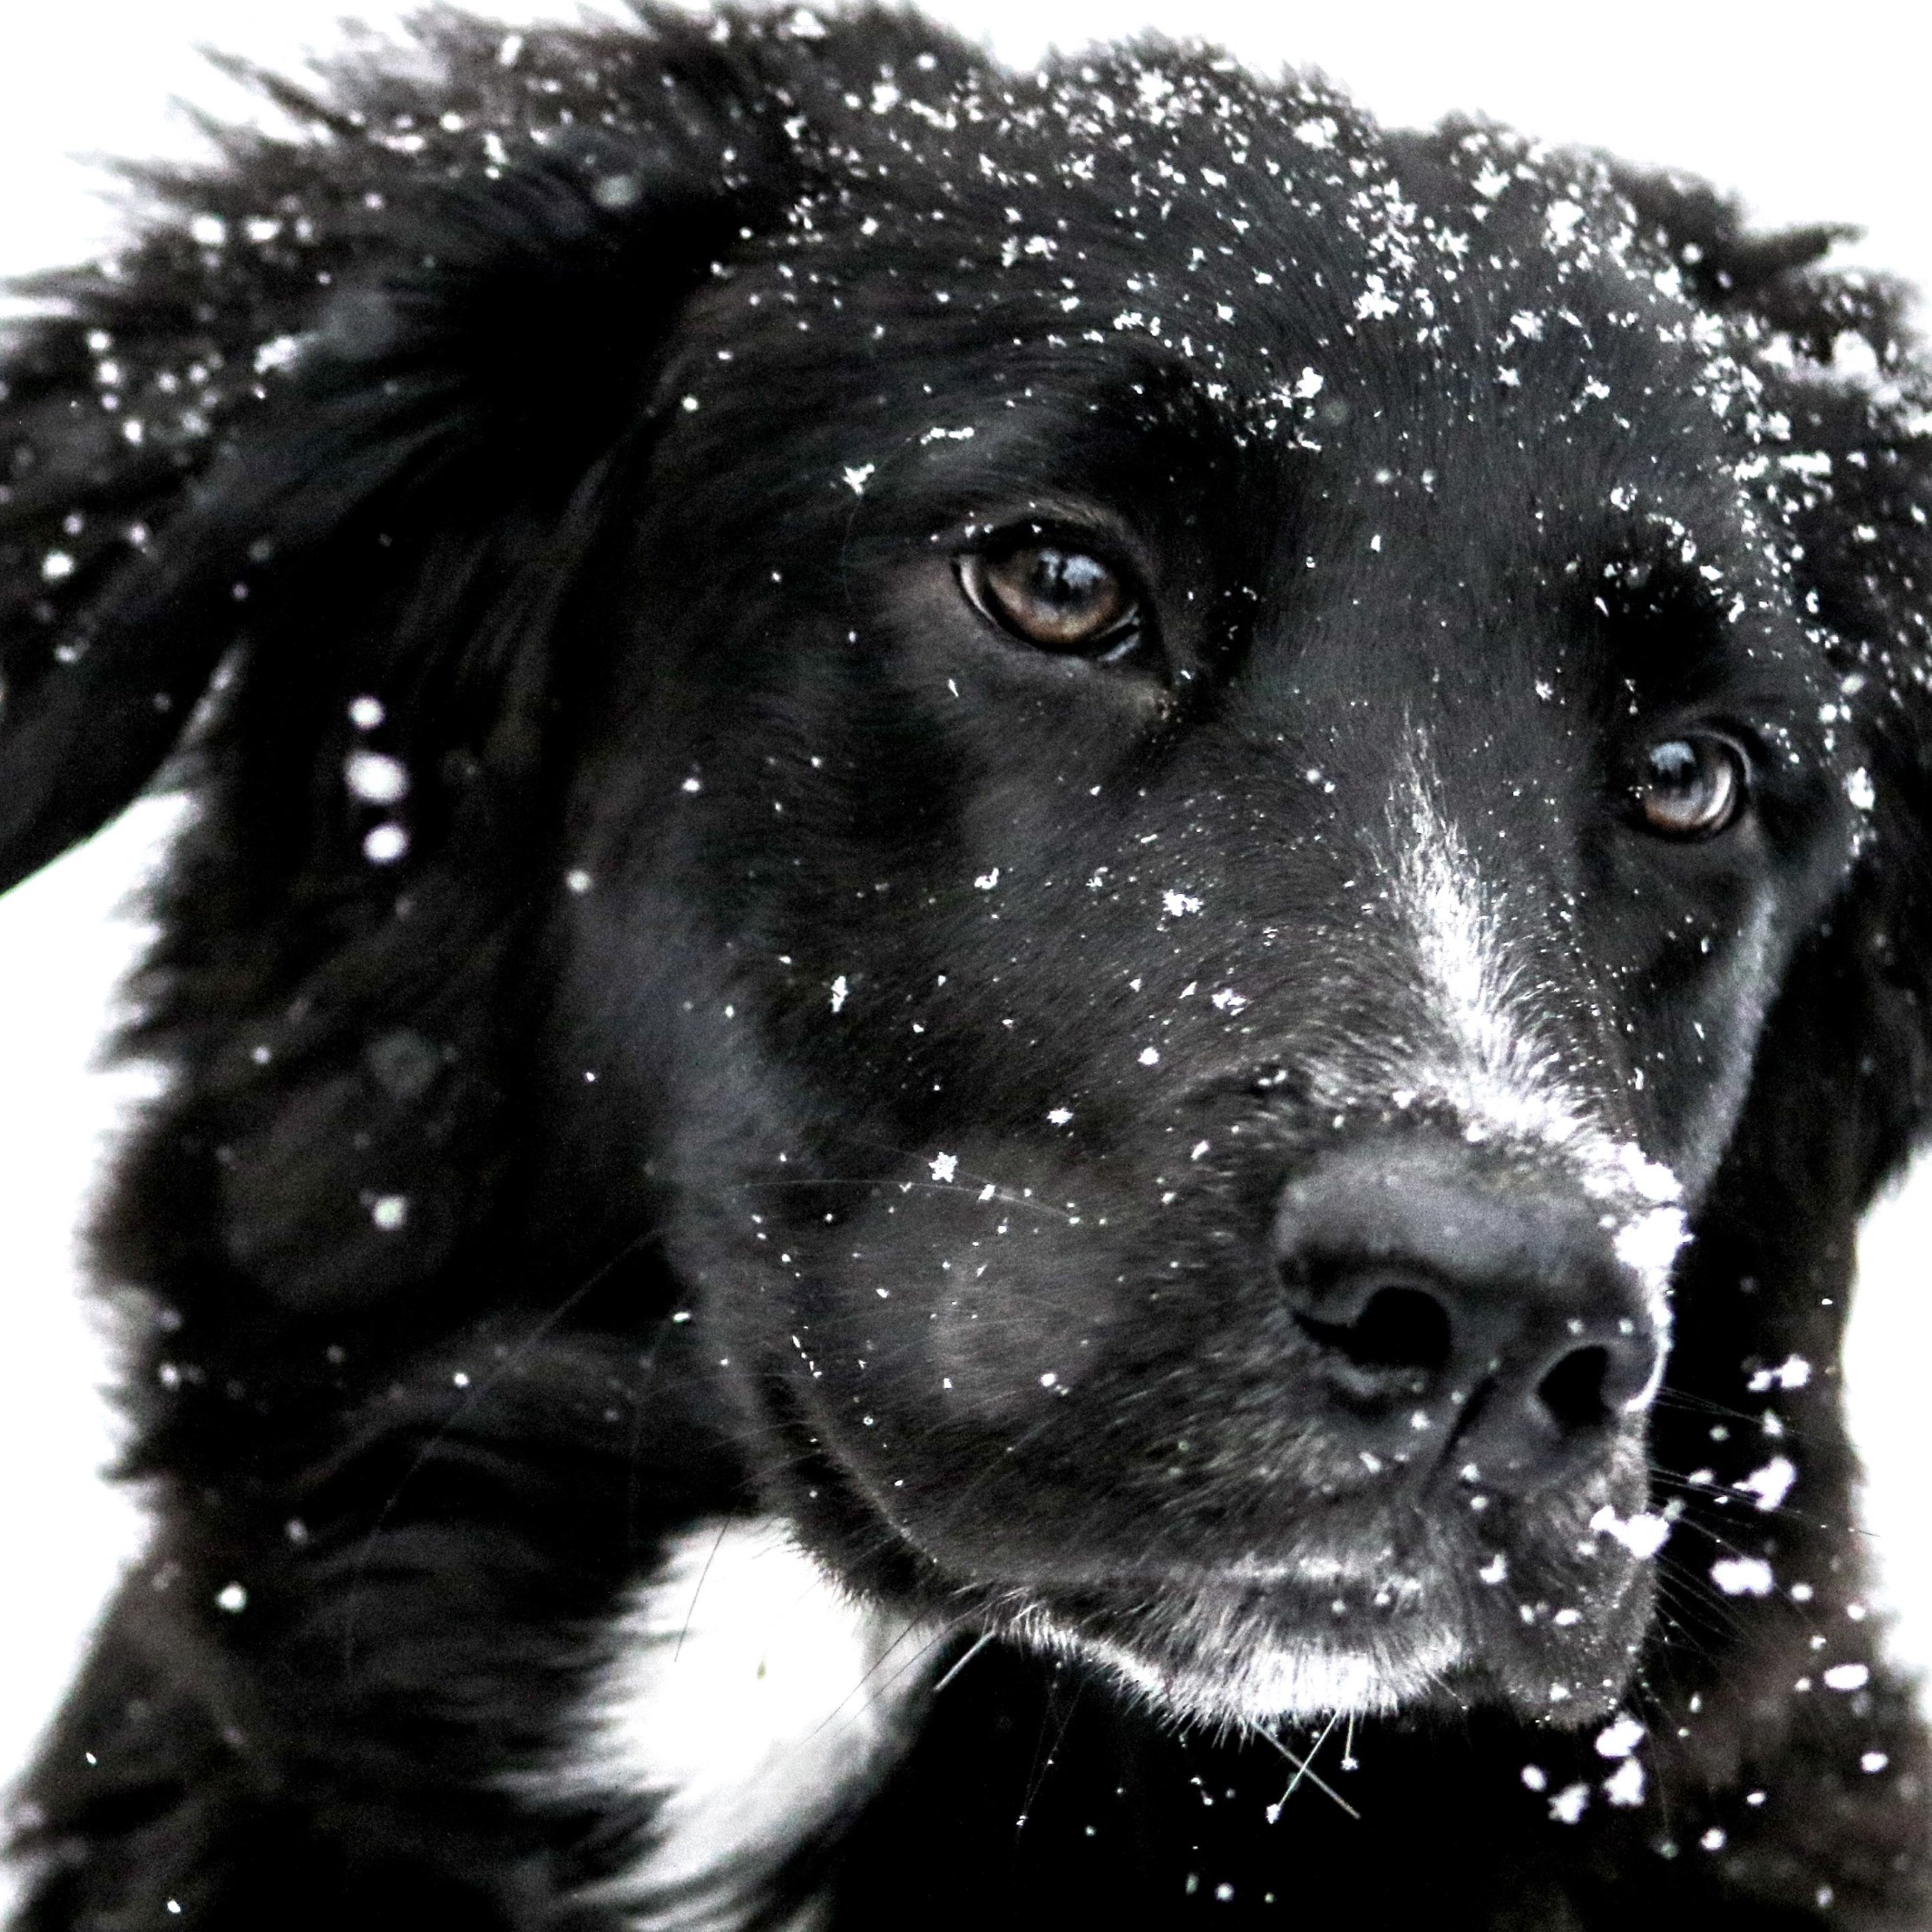 Snowing over the cute dog wallpaper 2224x2224